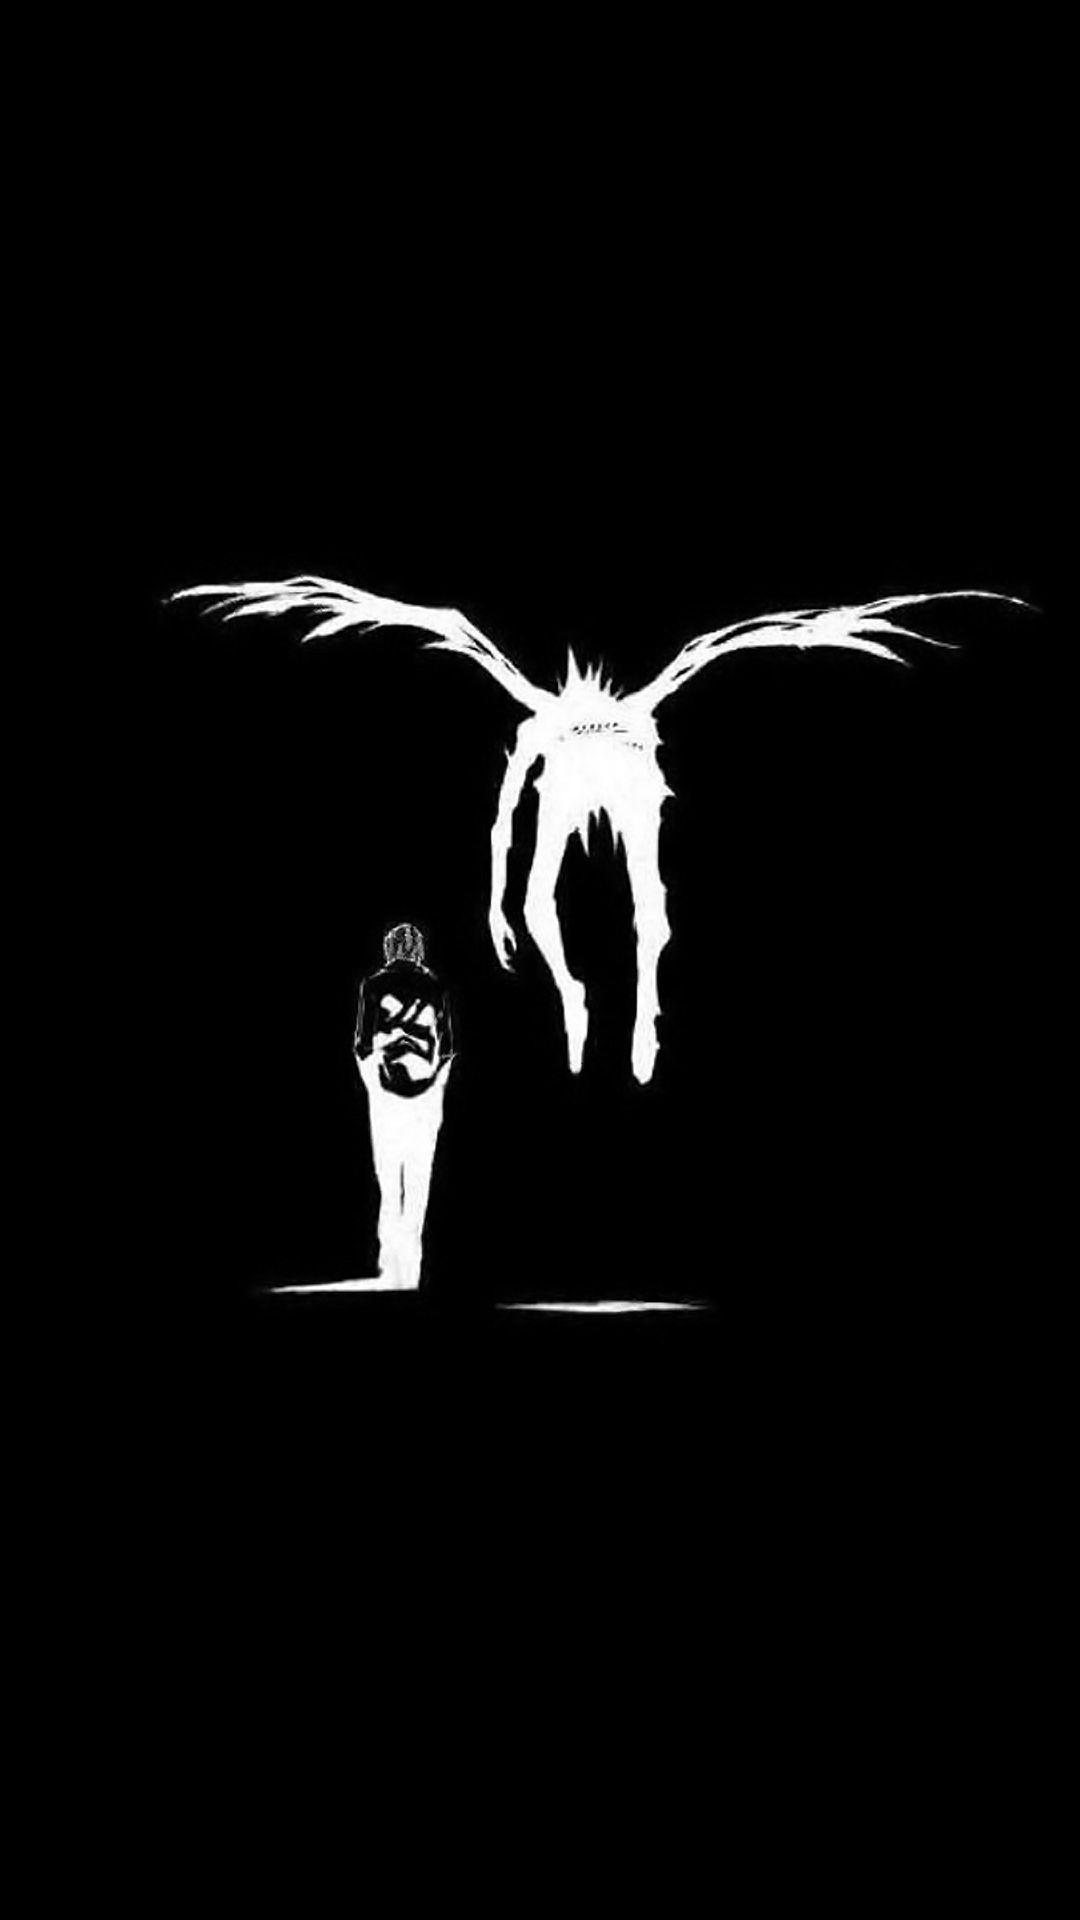 Death Note Iphone X Wallpapers Wallpaper Cave Death note | тетрадь смерти | обои. death note iphone x wallpapers